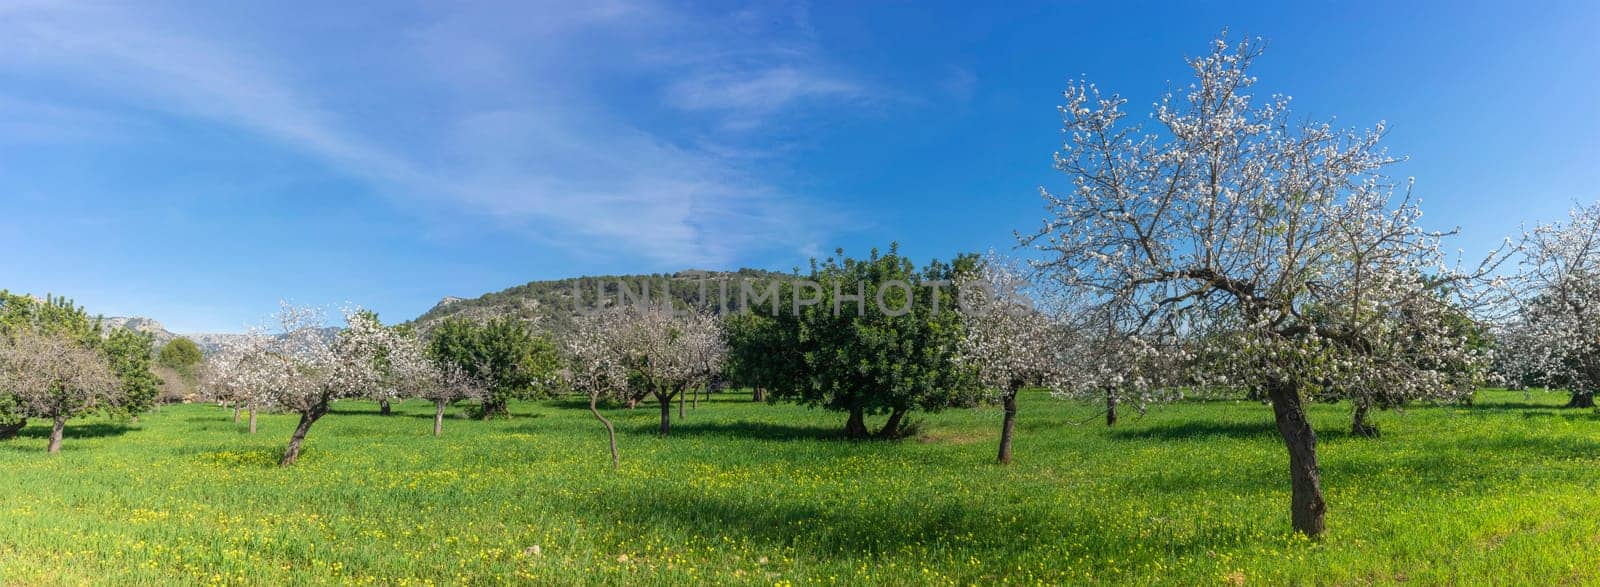 An expansive landscape showcases almond trees clothed in white blossoms, with a tapestry of yellow wildflowers underfoot, all set against the backdrop of a rugged mountain range and a sweeping blue sky,